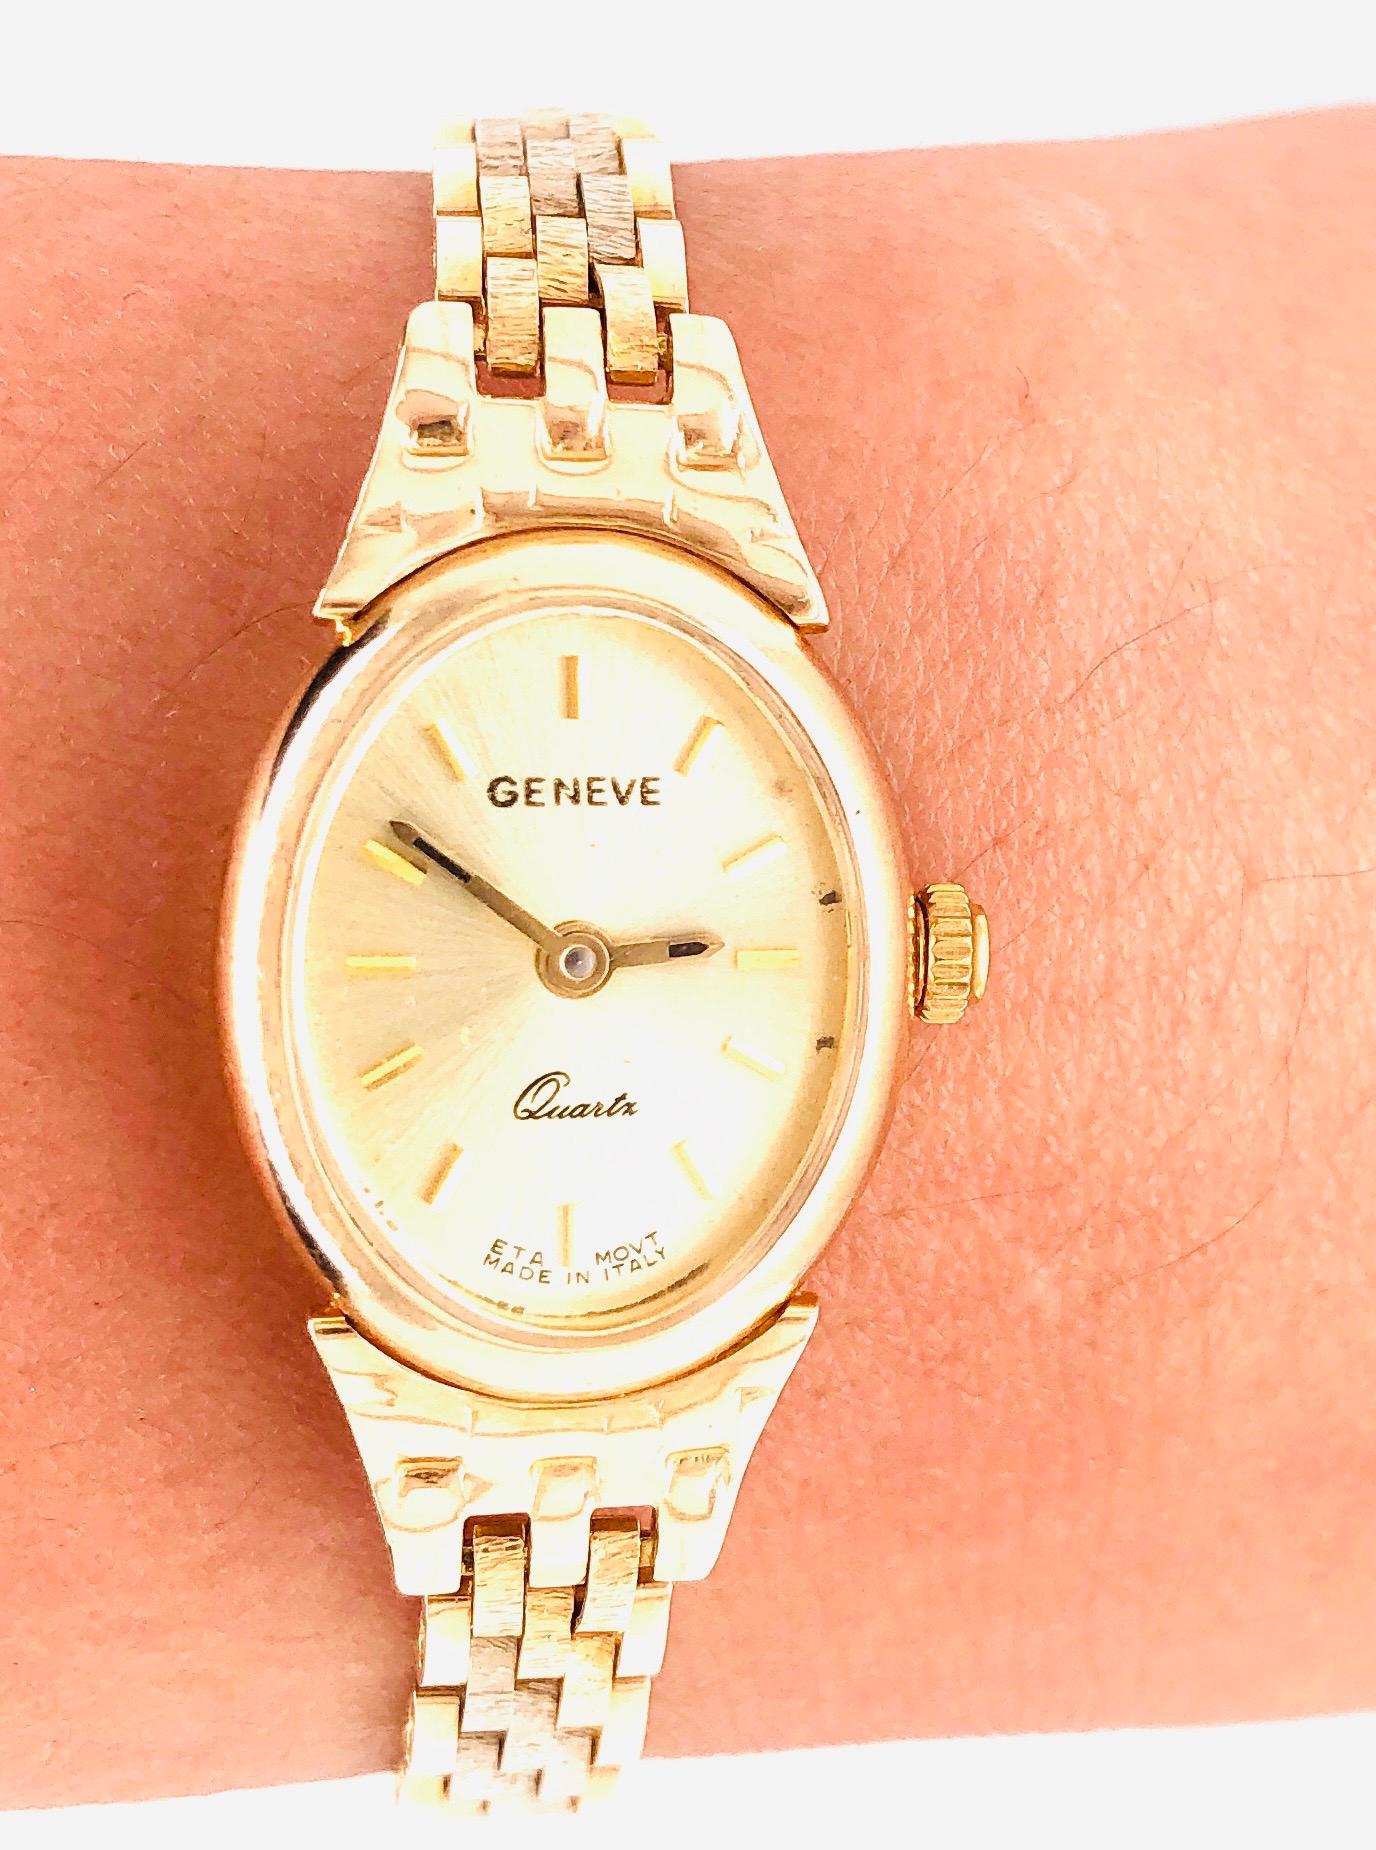 14Kt Yellow Gold Band and Watch by Geneve Quartz having a link gold band weighing an astounding 21 grams of 14Kt gold. Weight is without works.  Swiss Parts Made in Italy
Universal Geneve is sometimes confused with the Geneva Watch Group, but these